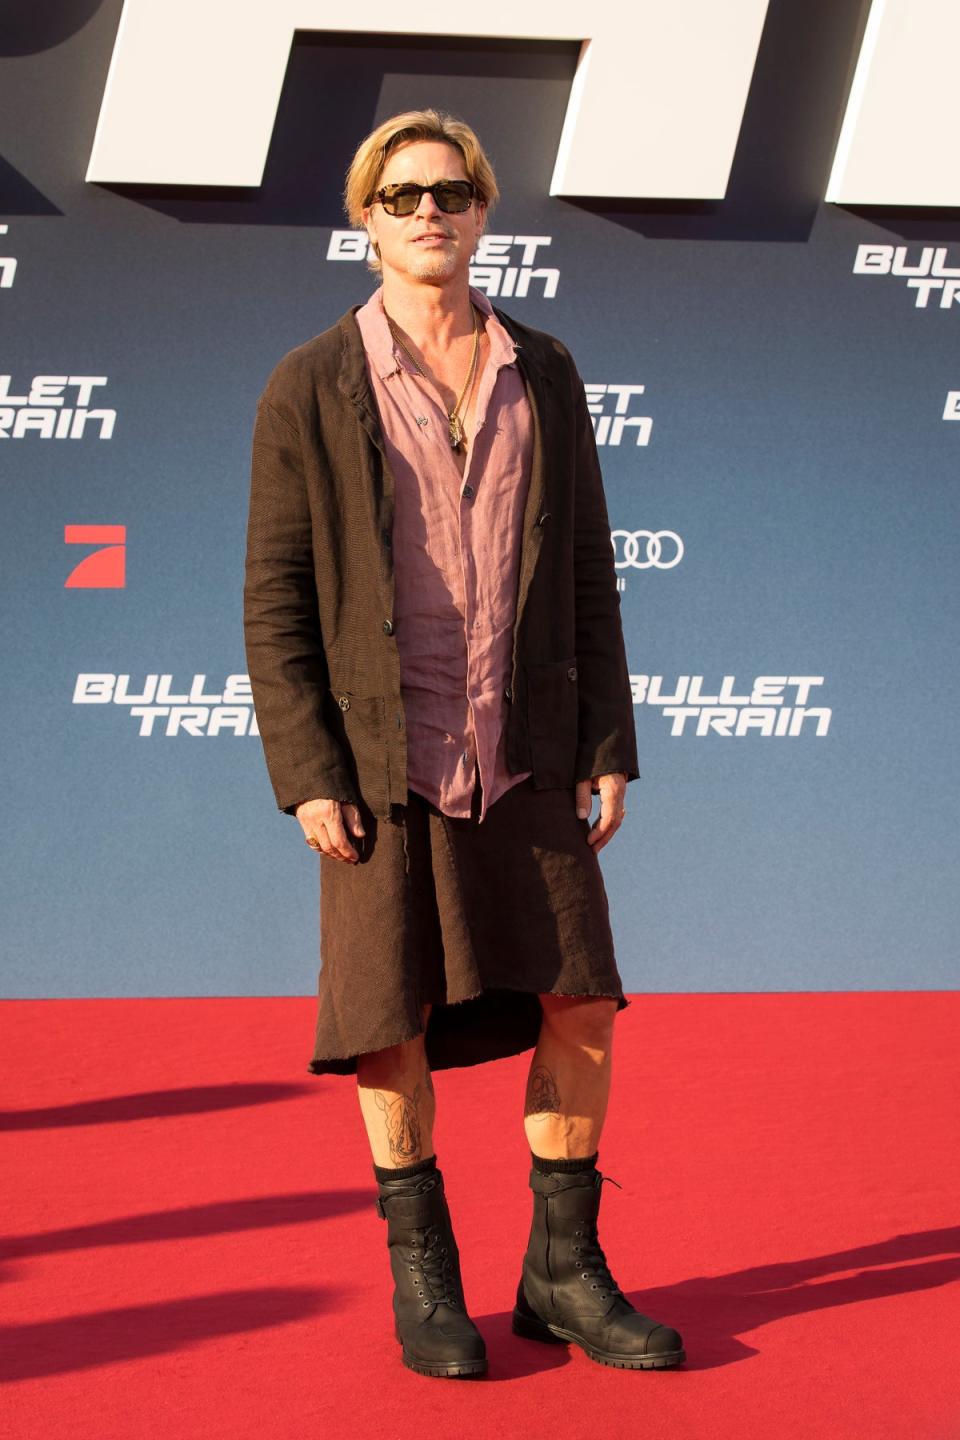 Brad Pitt attends Berlin premiere of Bullet Train in monochrome skirt look (Getty Images for Sony Pictures)